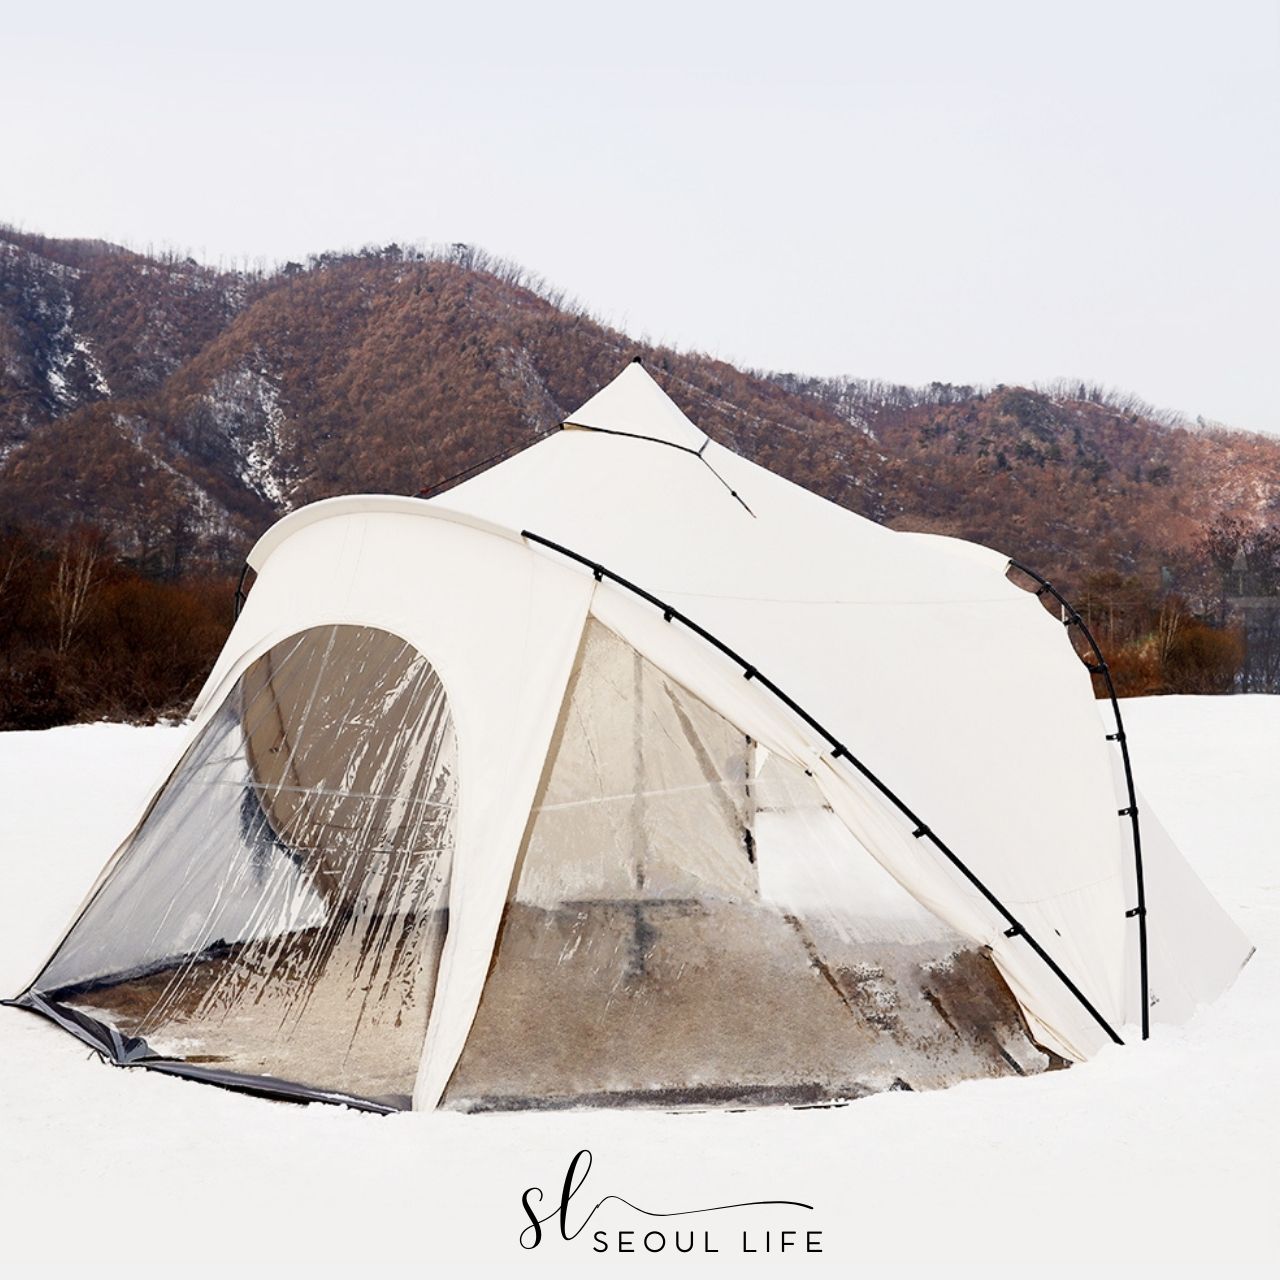 *Campingkan* Blow Shelter, 4-5 people, all-season, extendable tent